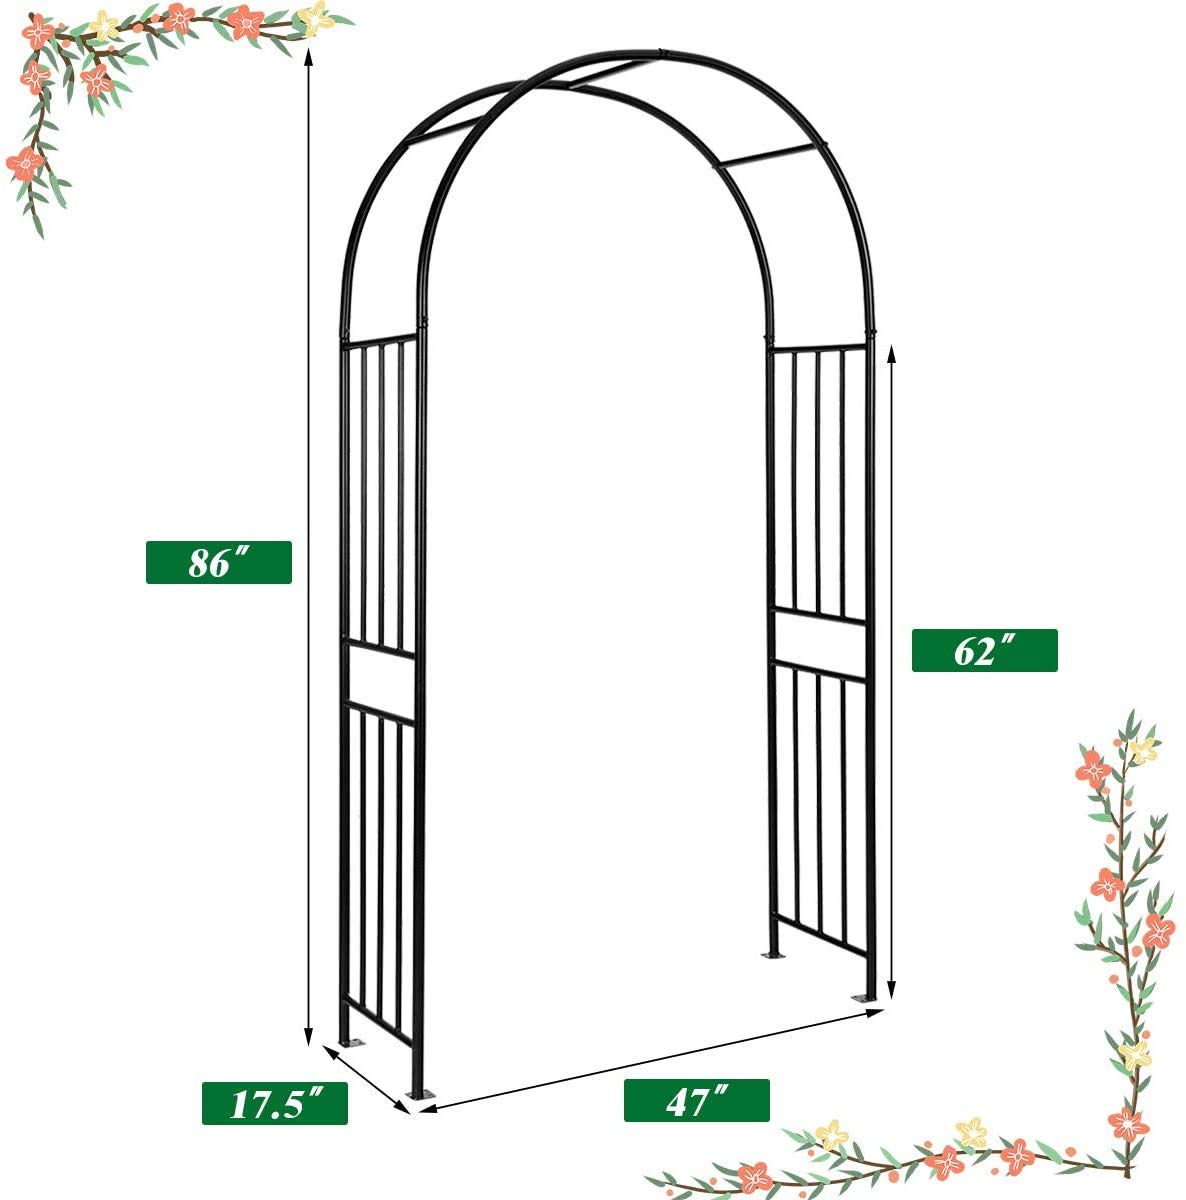 LDAILY Moccha Garden Arch Arbor Trellis, 7.2Ft Outdoor Steel Arbor with Stakes, Metal Archway for Climbing Plants, Wide Sturdy Durable Garden Arch for Lawn, Party, Ceremony Wedding Decoration, Black